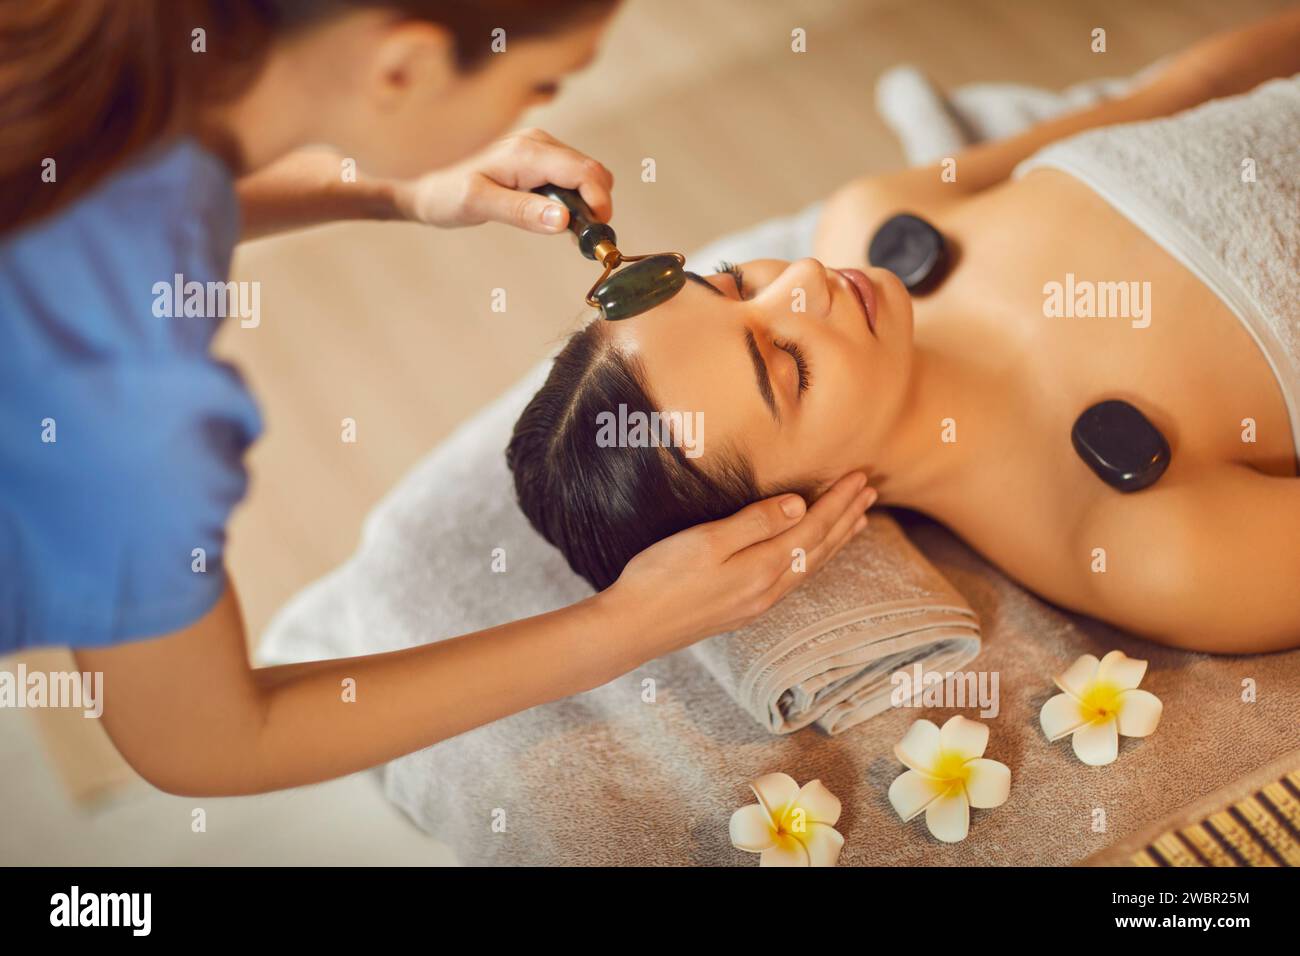 Beautiful young woman relaxing in spa salon, view from above Stock Photo